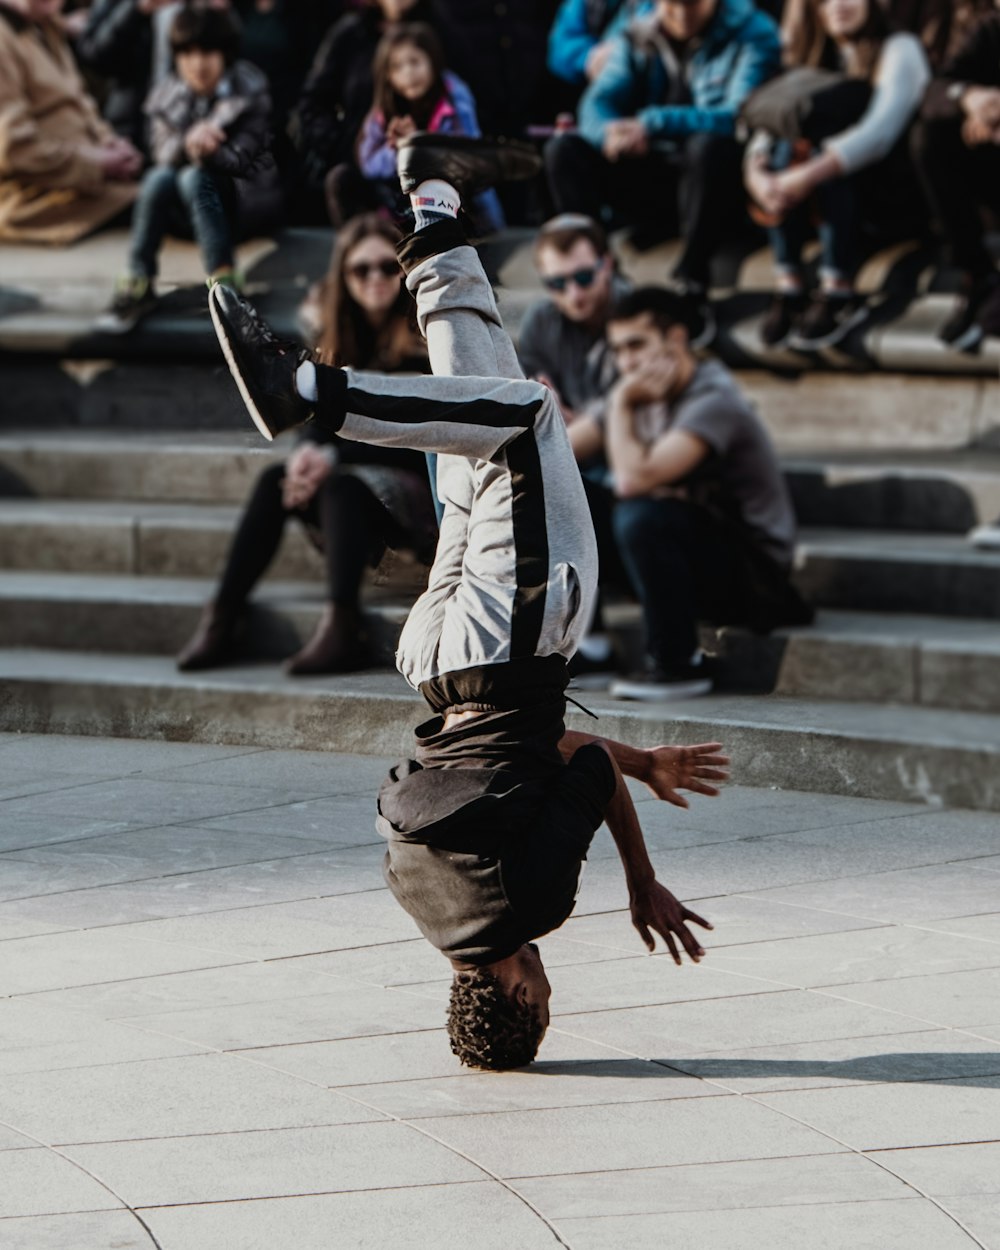 Man doing head spin on park during daytime photo – Free Street photography  Image on Unsplash